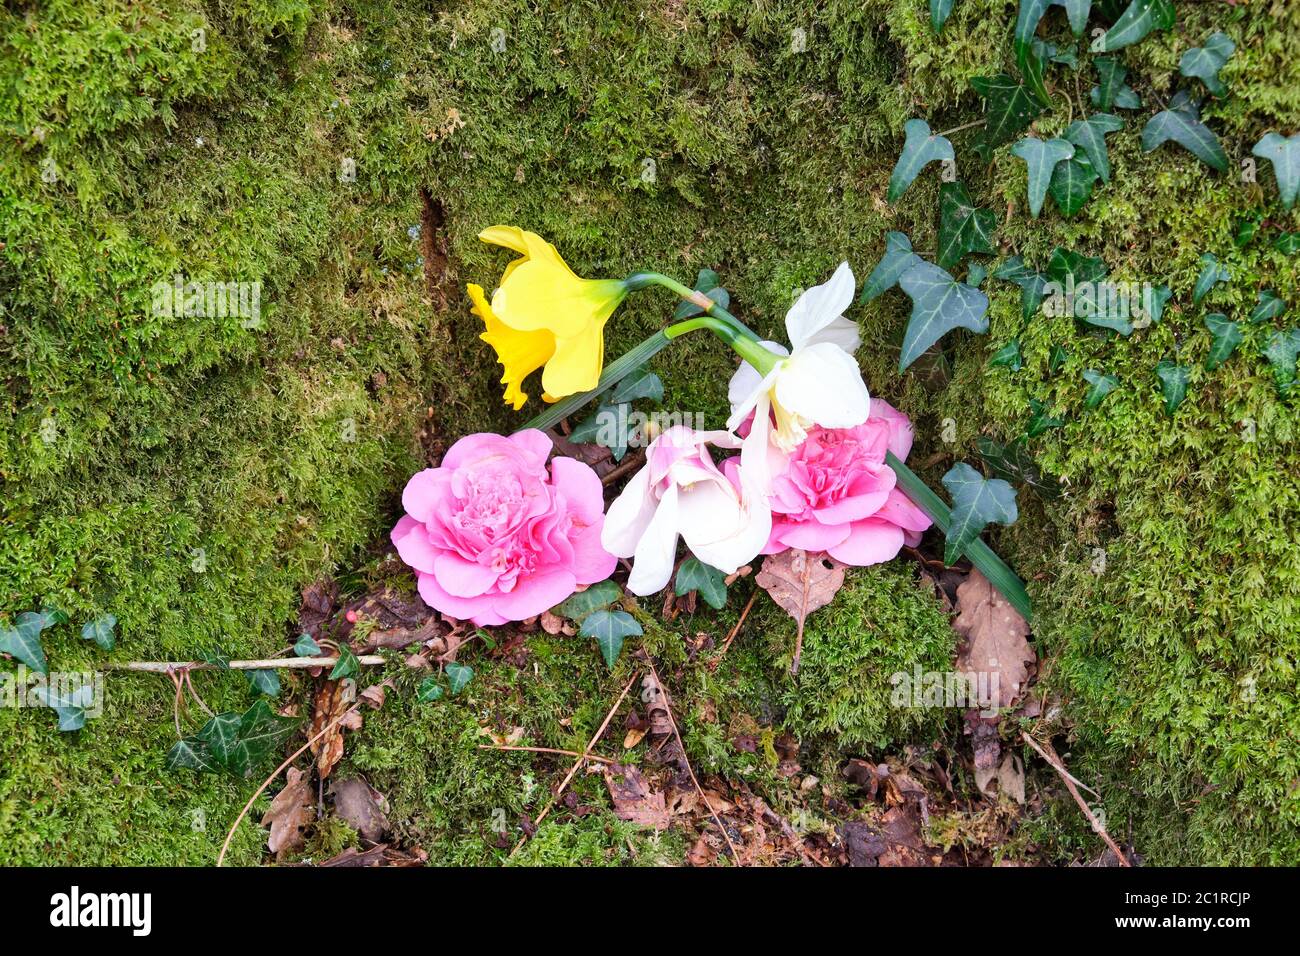 Blooming flowers in front of some green moss Stock Photo - Alamy